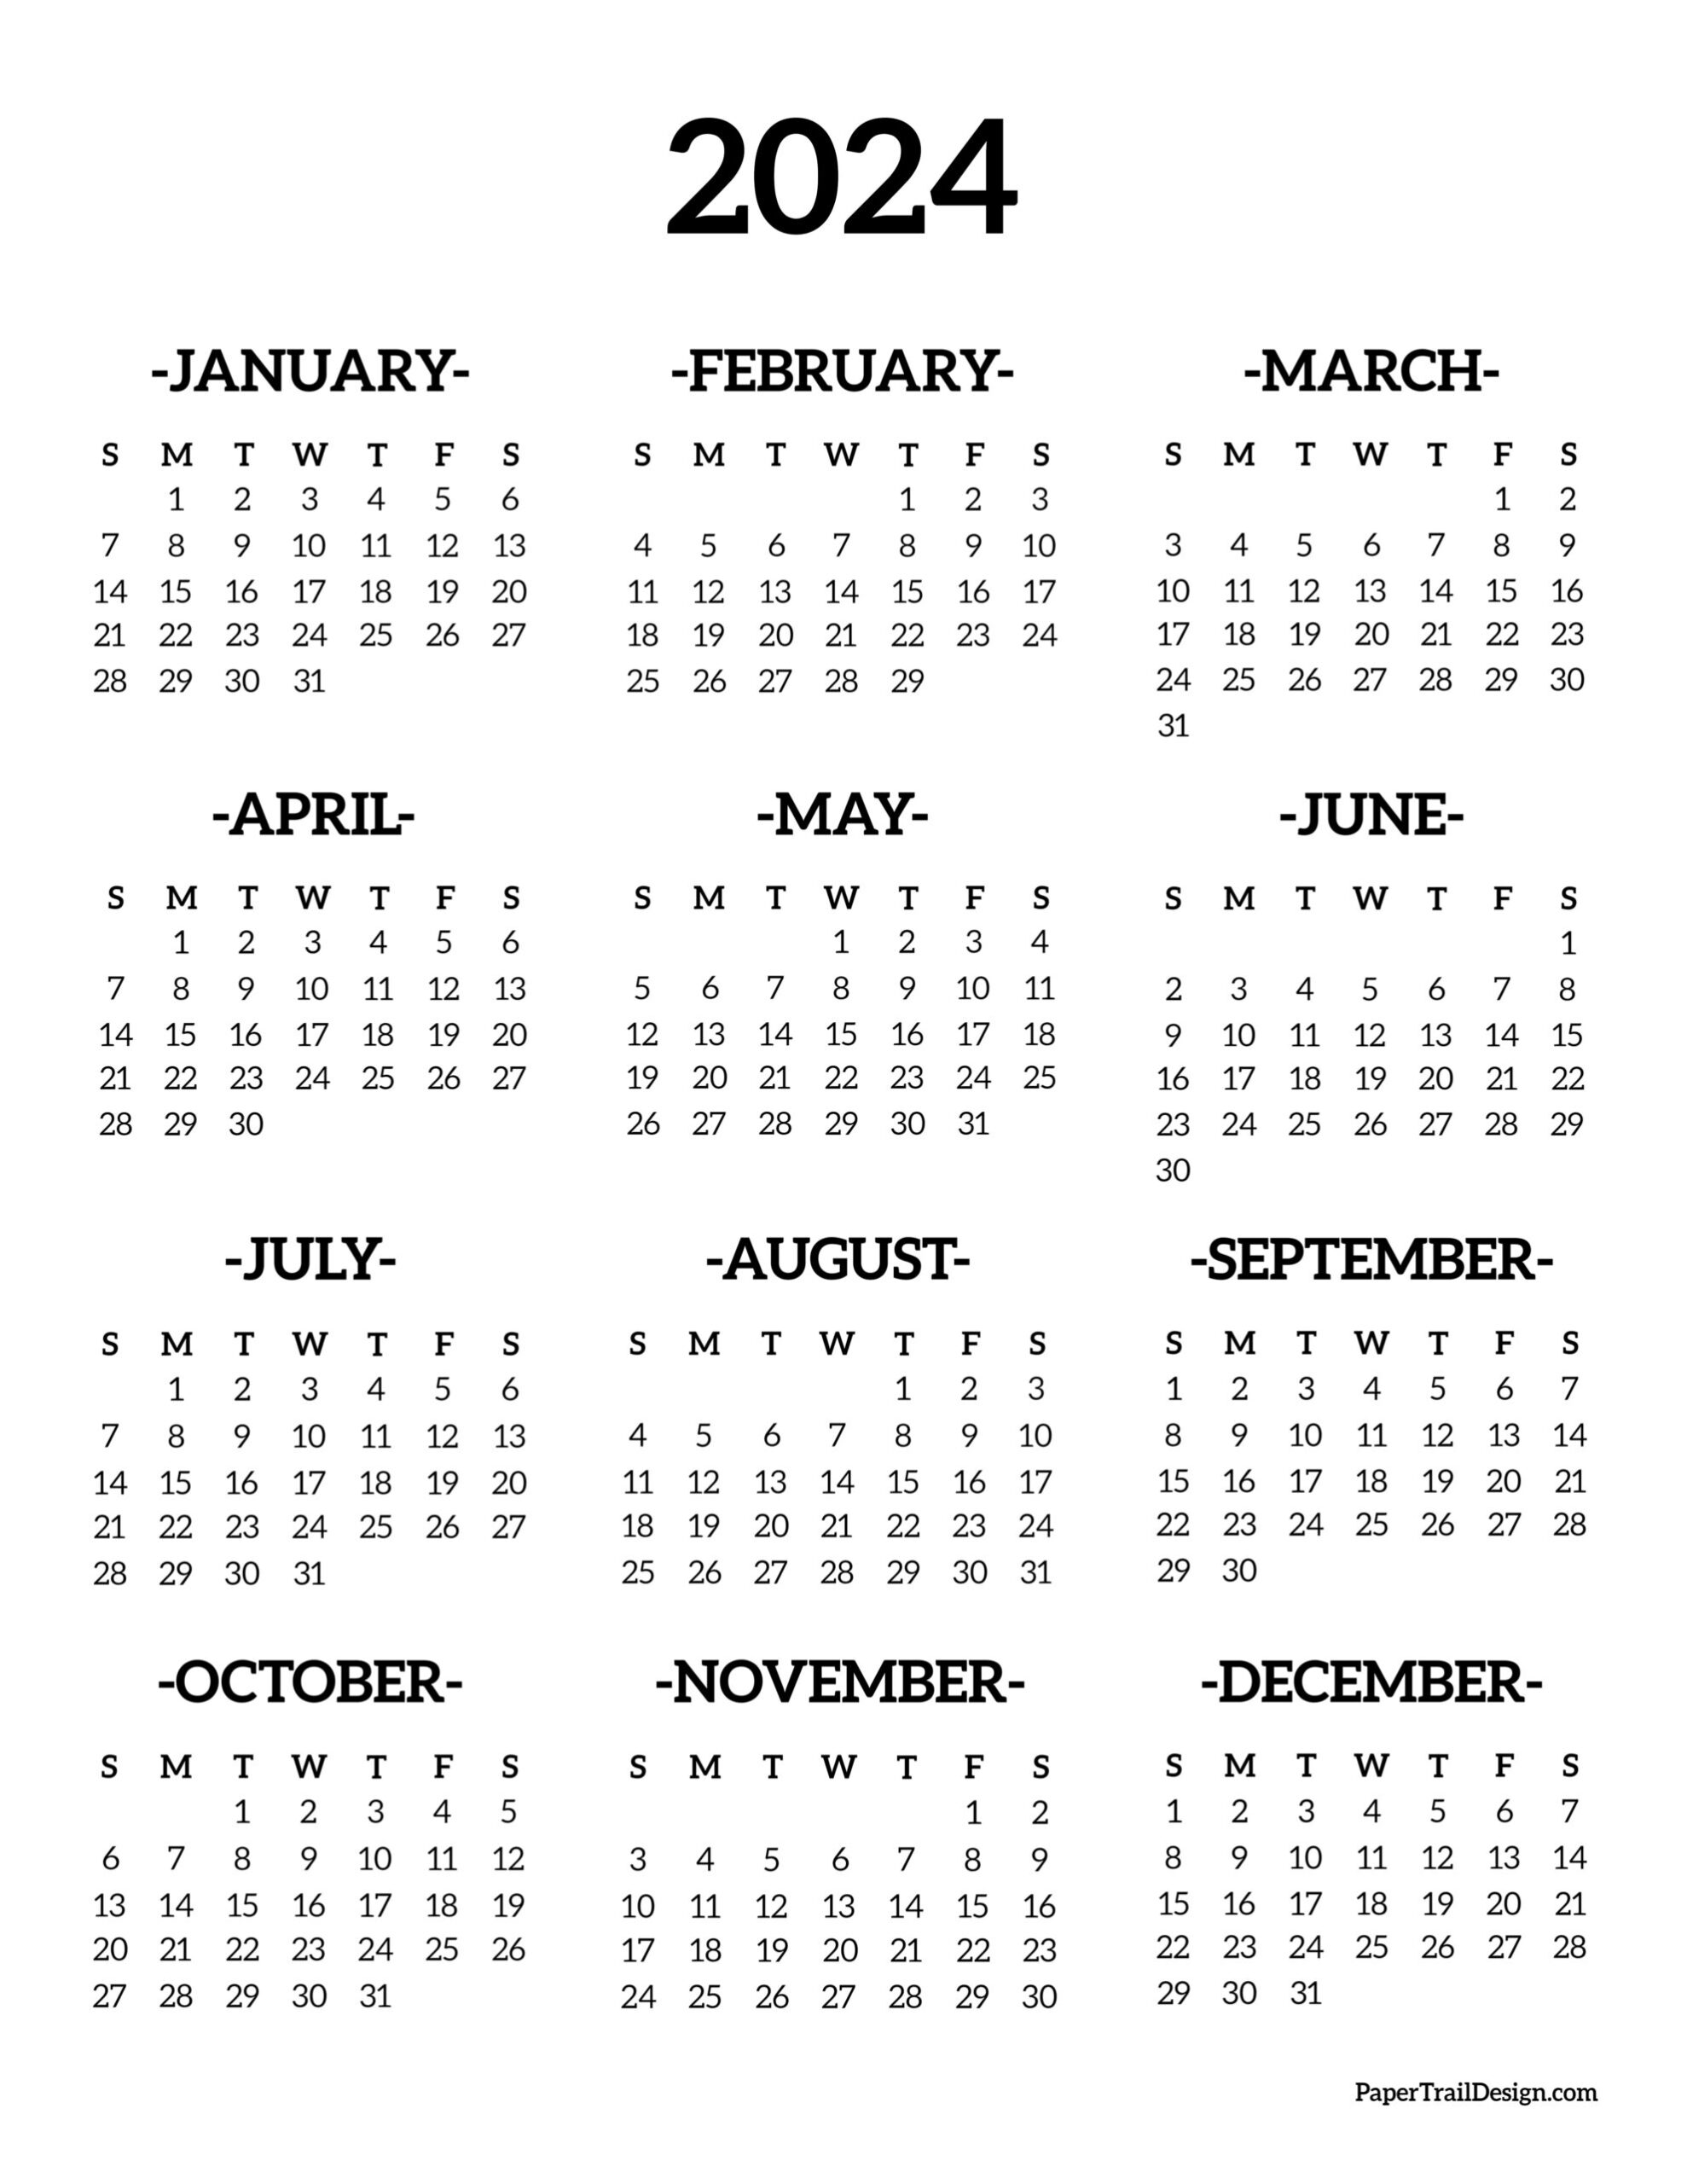 Calendar 2024 Printable One Page - Paper Trail Design for Printable Yearly Calendar 2024 Free